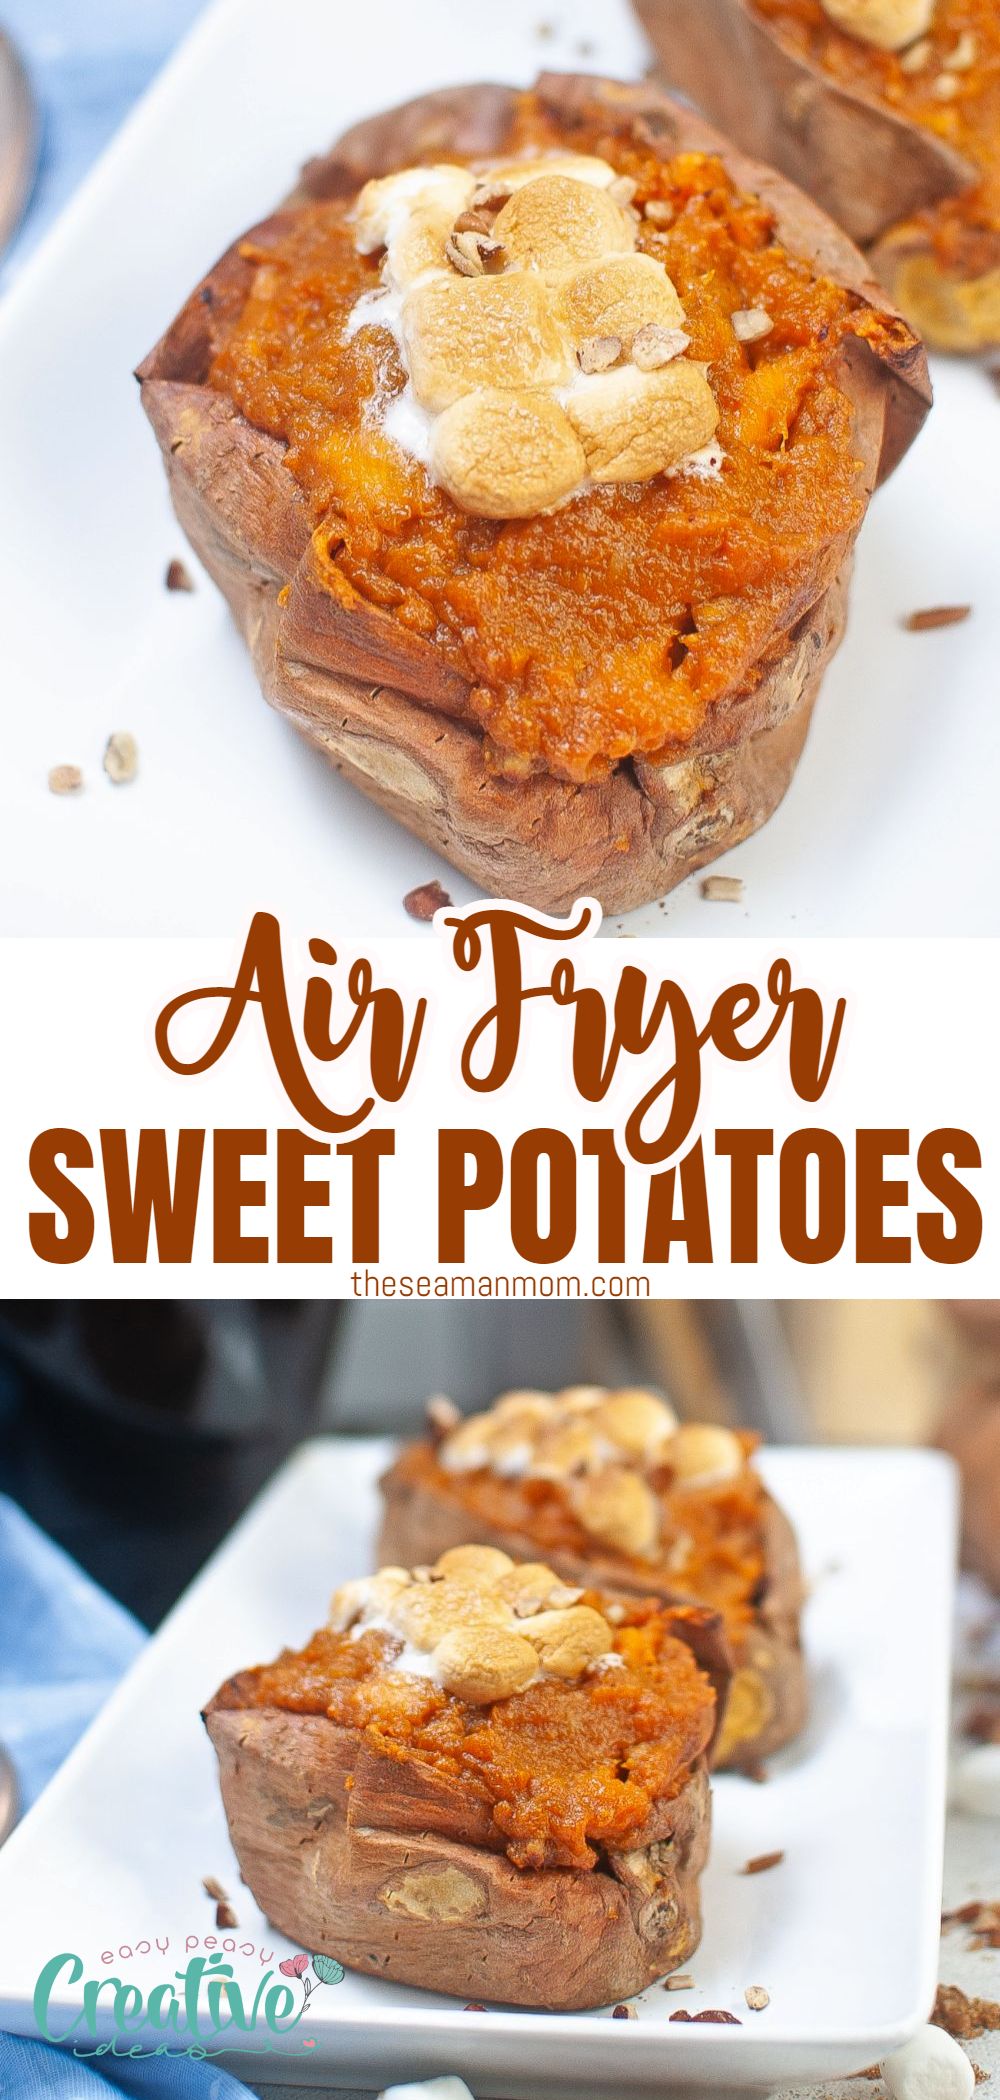 Do you want to fancy up your sweet potato in a healthier way? Try air fryer baked sweet potatoes, which are delicious and crispy. This dish is simple to make and yields a wonderful, crispy potato that's ideal as a side or snack. via @petroneagu